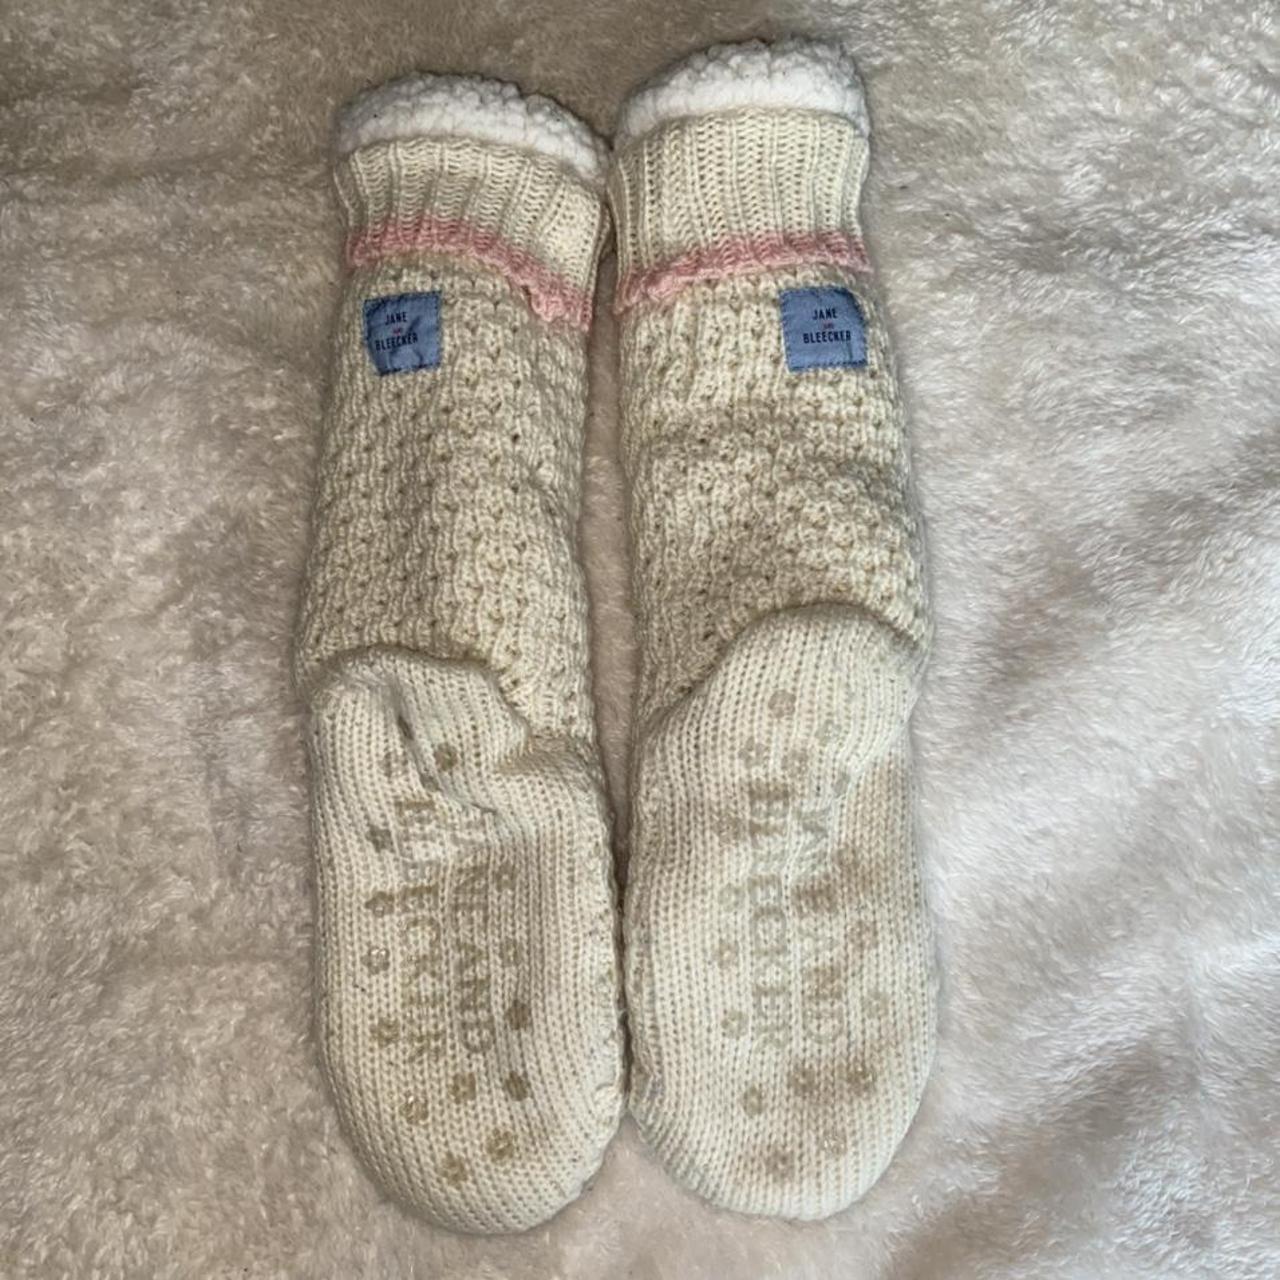 Product Image 2 - super comfy fuzzy socks!

- sheep